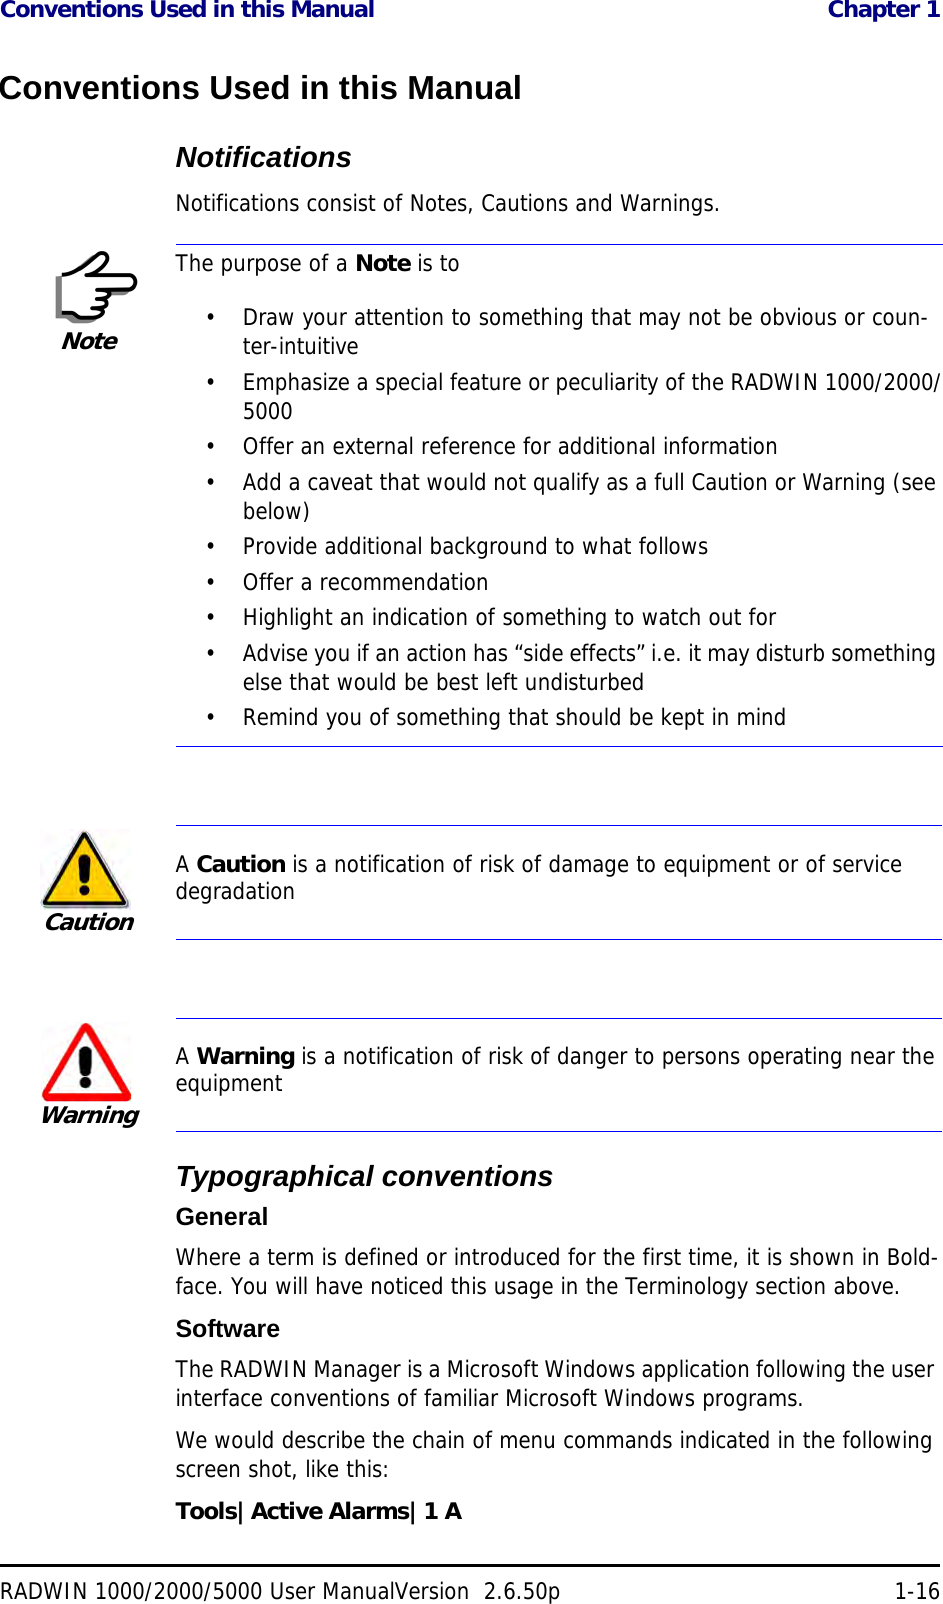 Conventions Used in this Manual  Chapter 1RADWIN 1000/2000/5000 User ManualVersion  2.6.50p 1-16Conventions Used in this ManualNotificationsNotifications consist of Notes, Cautions and Warnings.Typographical conventionsGeneralWhere a term is defined or introduced for the first time, it is shown in Bold-face. You will have noticed this usage in the Terminology section above.SoftwareThe RADWIN Manager is a Microsoft Windows application following the user interface conventions of familiar Microsoft Windows programs.We would describe the chain of menu commands indicated in the following screen shot, like this:Tools|Active Alarms|1 ANoteThe purpose of a Note is to• Draw your attention to something that may not be obvious or coun-ter-intuitive• Emphasize a special feature or peculiarity of the RADWIN 1000/2000/5000• Offer an external reference for additional information• Add a caveat that would not qualify as a full Caution or Warning (see below)• Provide additional background to what follows• Offer a recommendation• Highlight an indication of something to watch out for• Advise you if an action has “side effects” i.e. it may disturb something else that would be best left undisturbed• Remind you of something that should be kept in mindCautionA Caution is a notification of risk of damage to equipment or of service degradationWarningA Warning is a notification of risk of danger to persons operating near the equipment